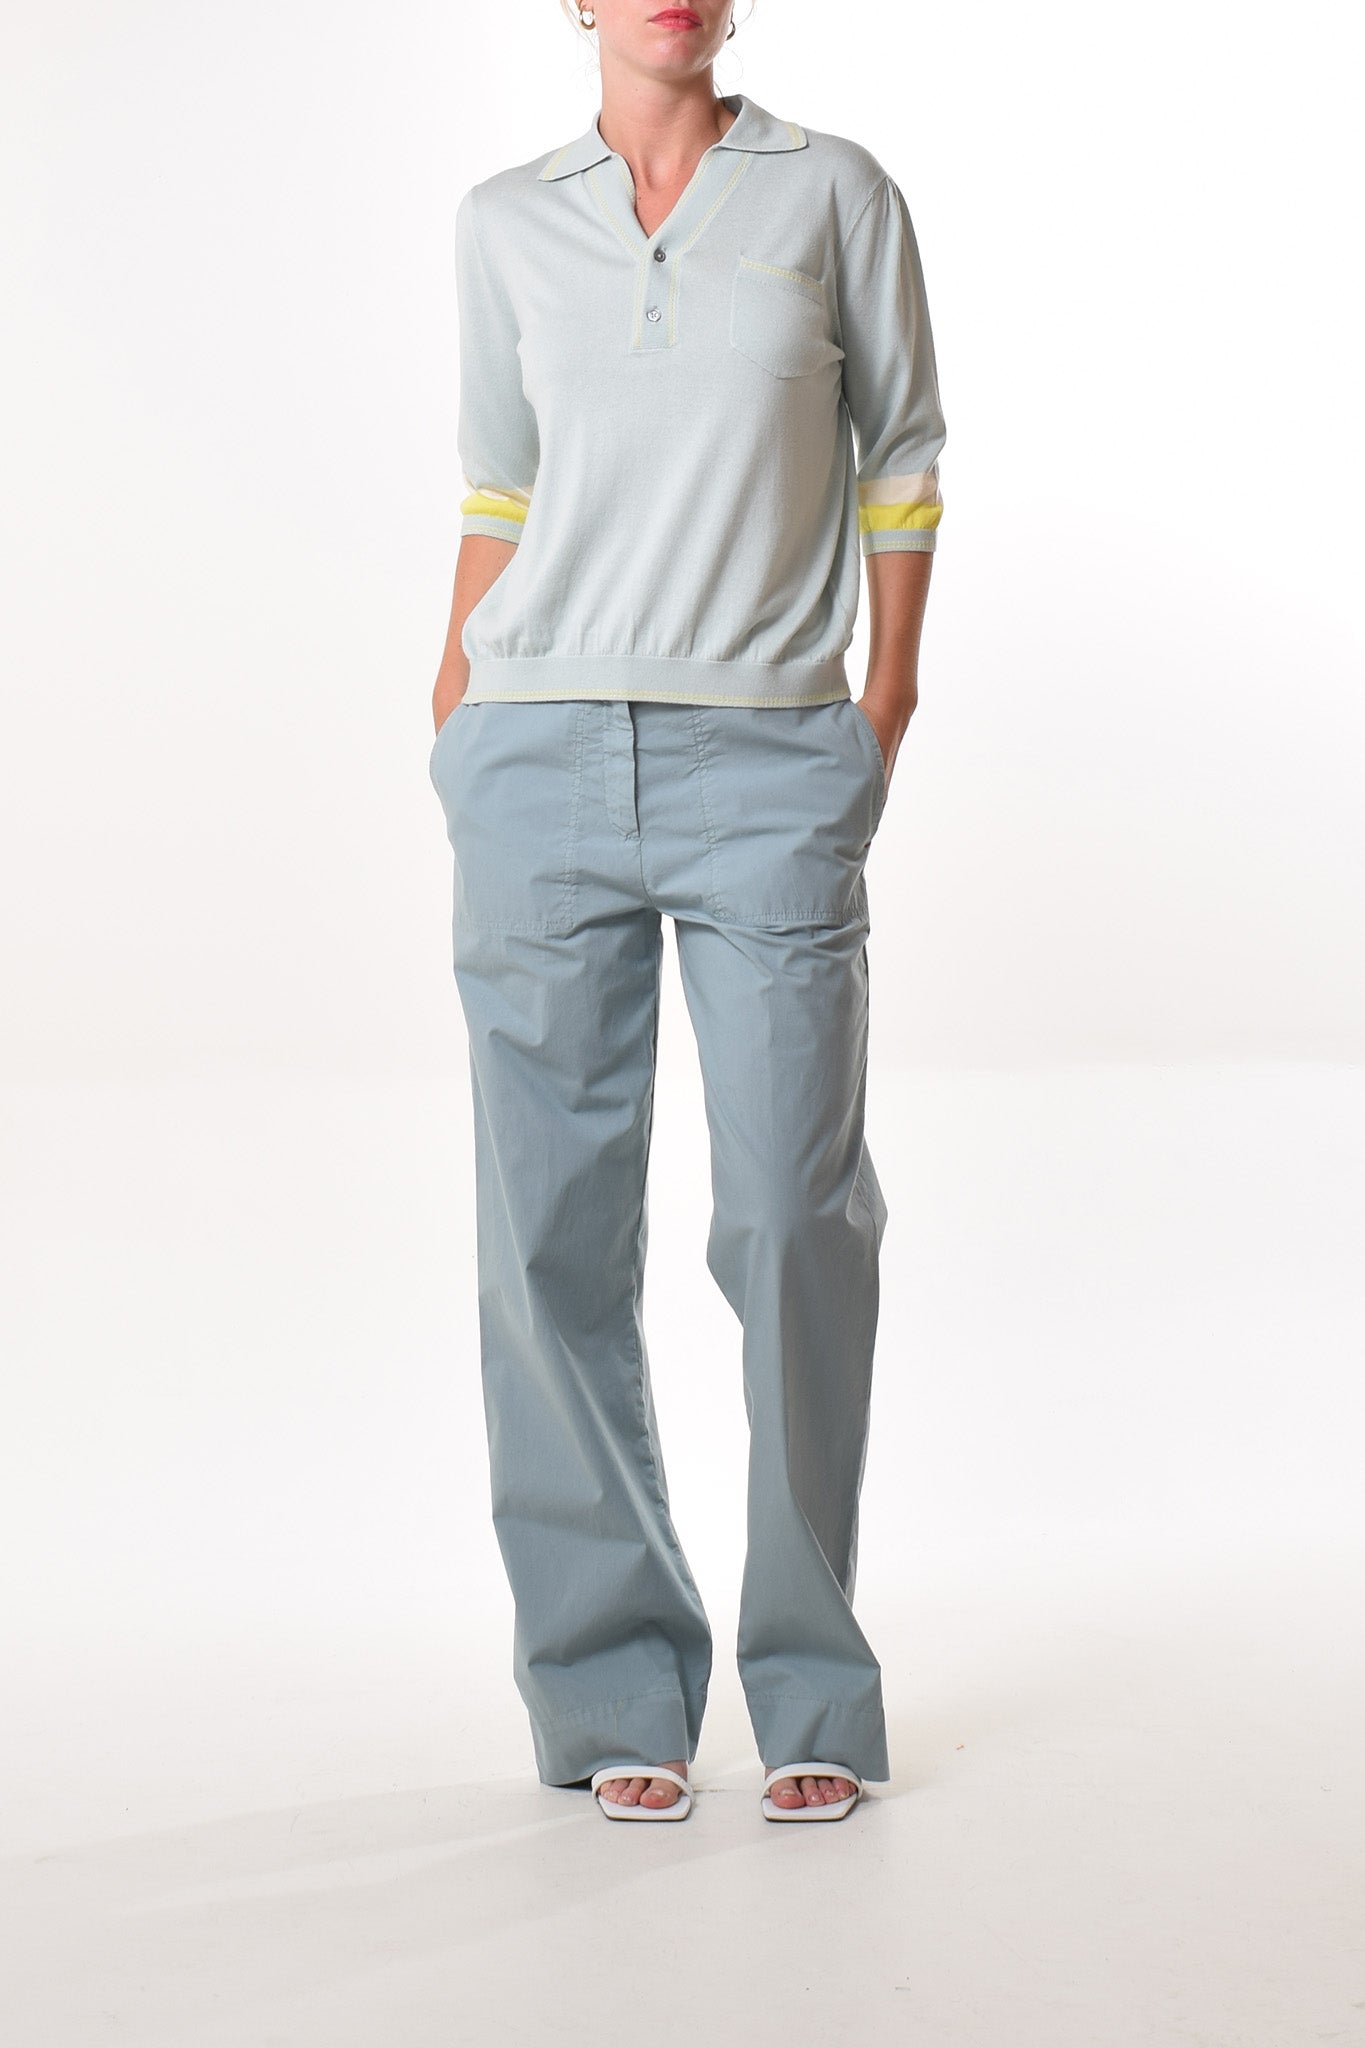 Matera trousers in Teal